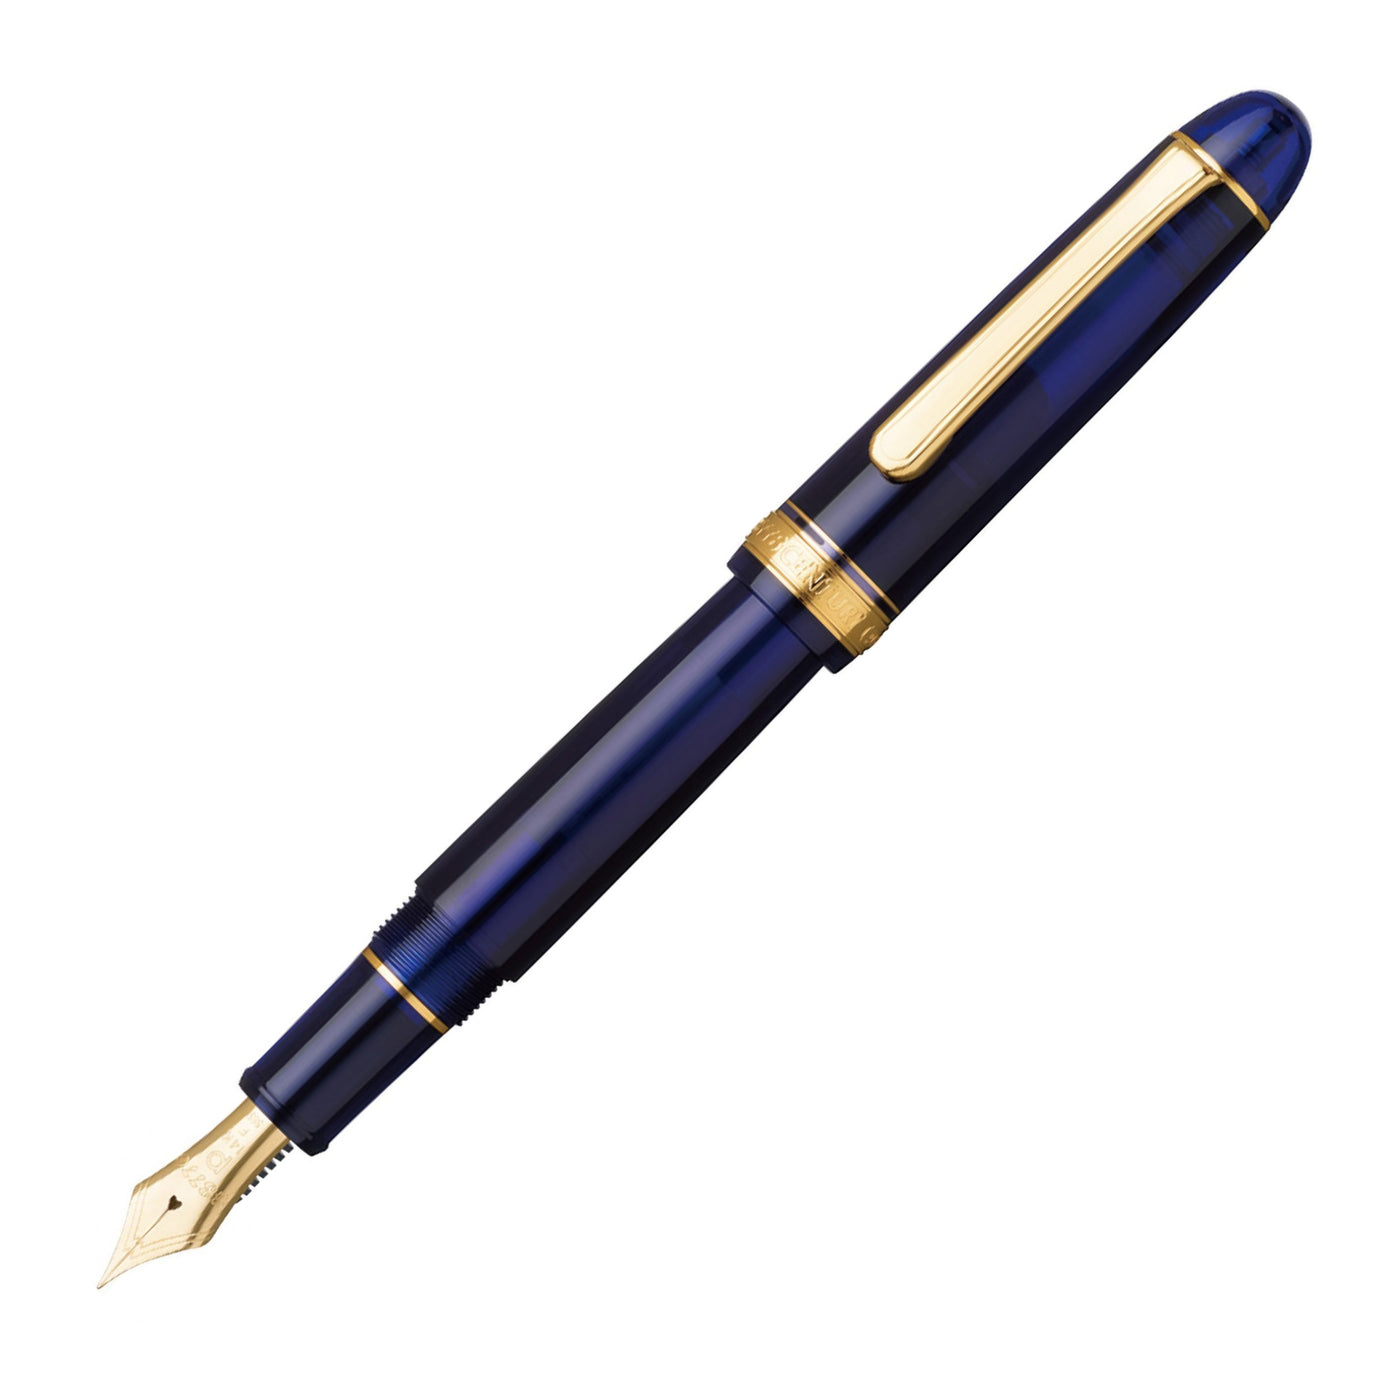 Platinum #3776 Fountain Pen - Chartres Blue with Gold Trim | Atlas Stationers.